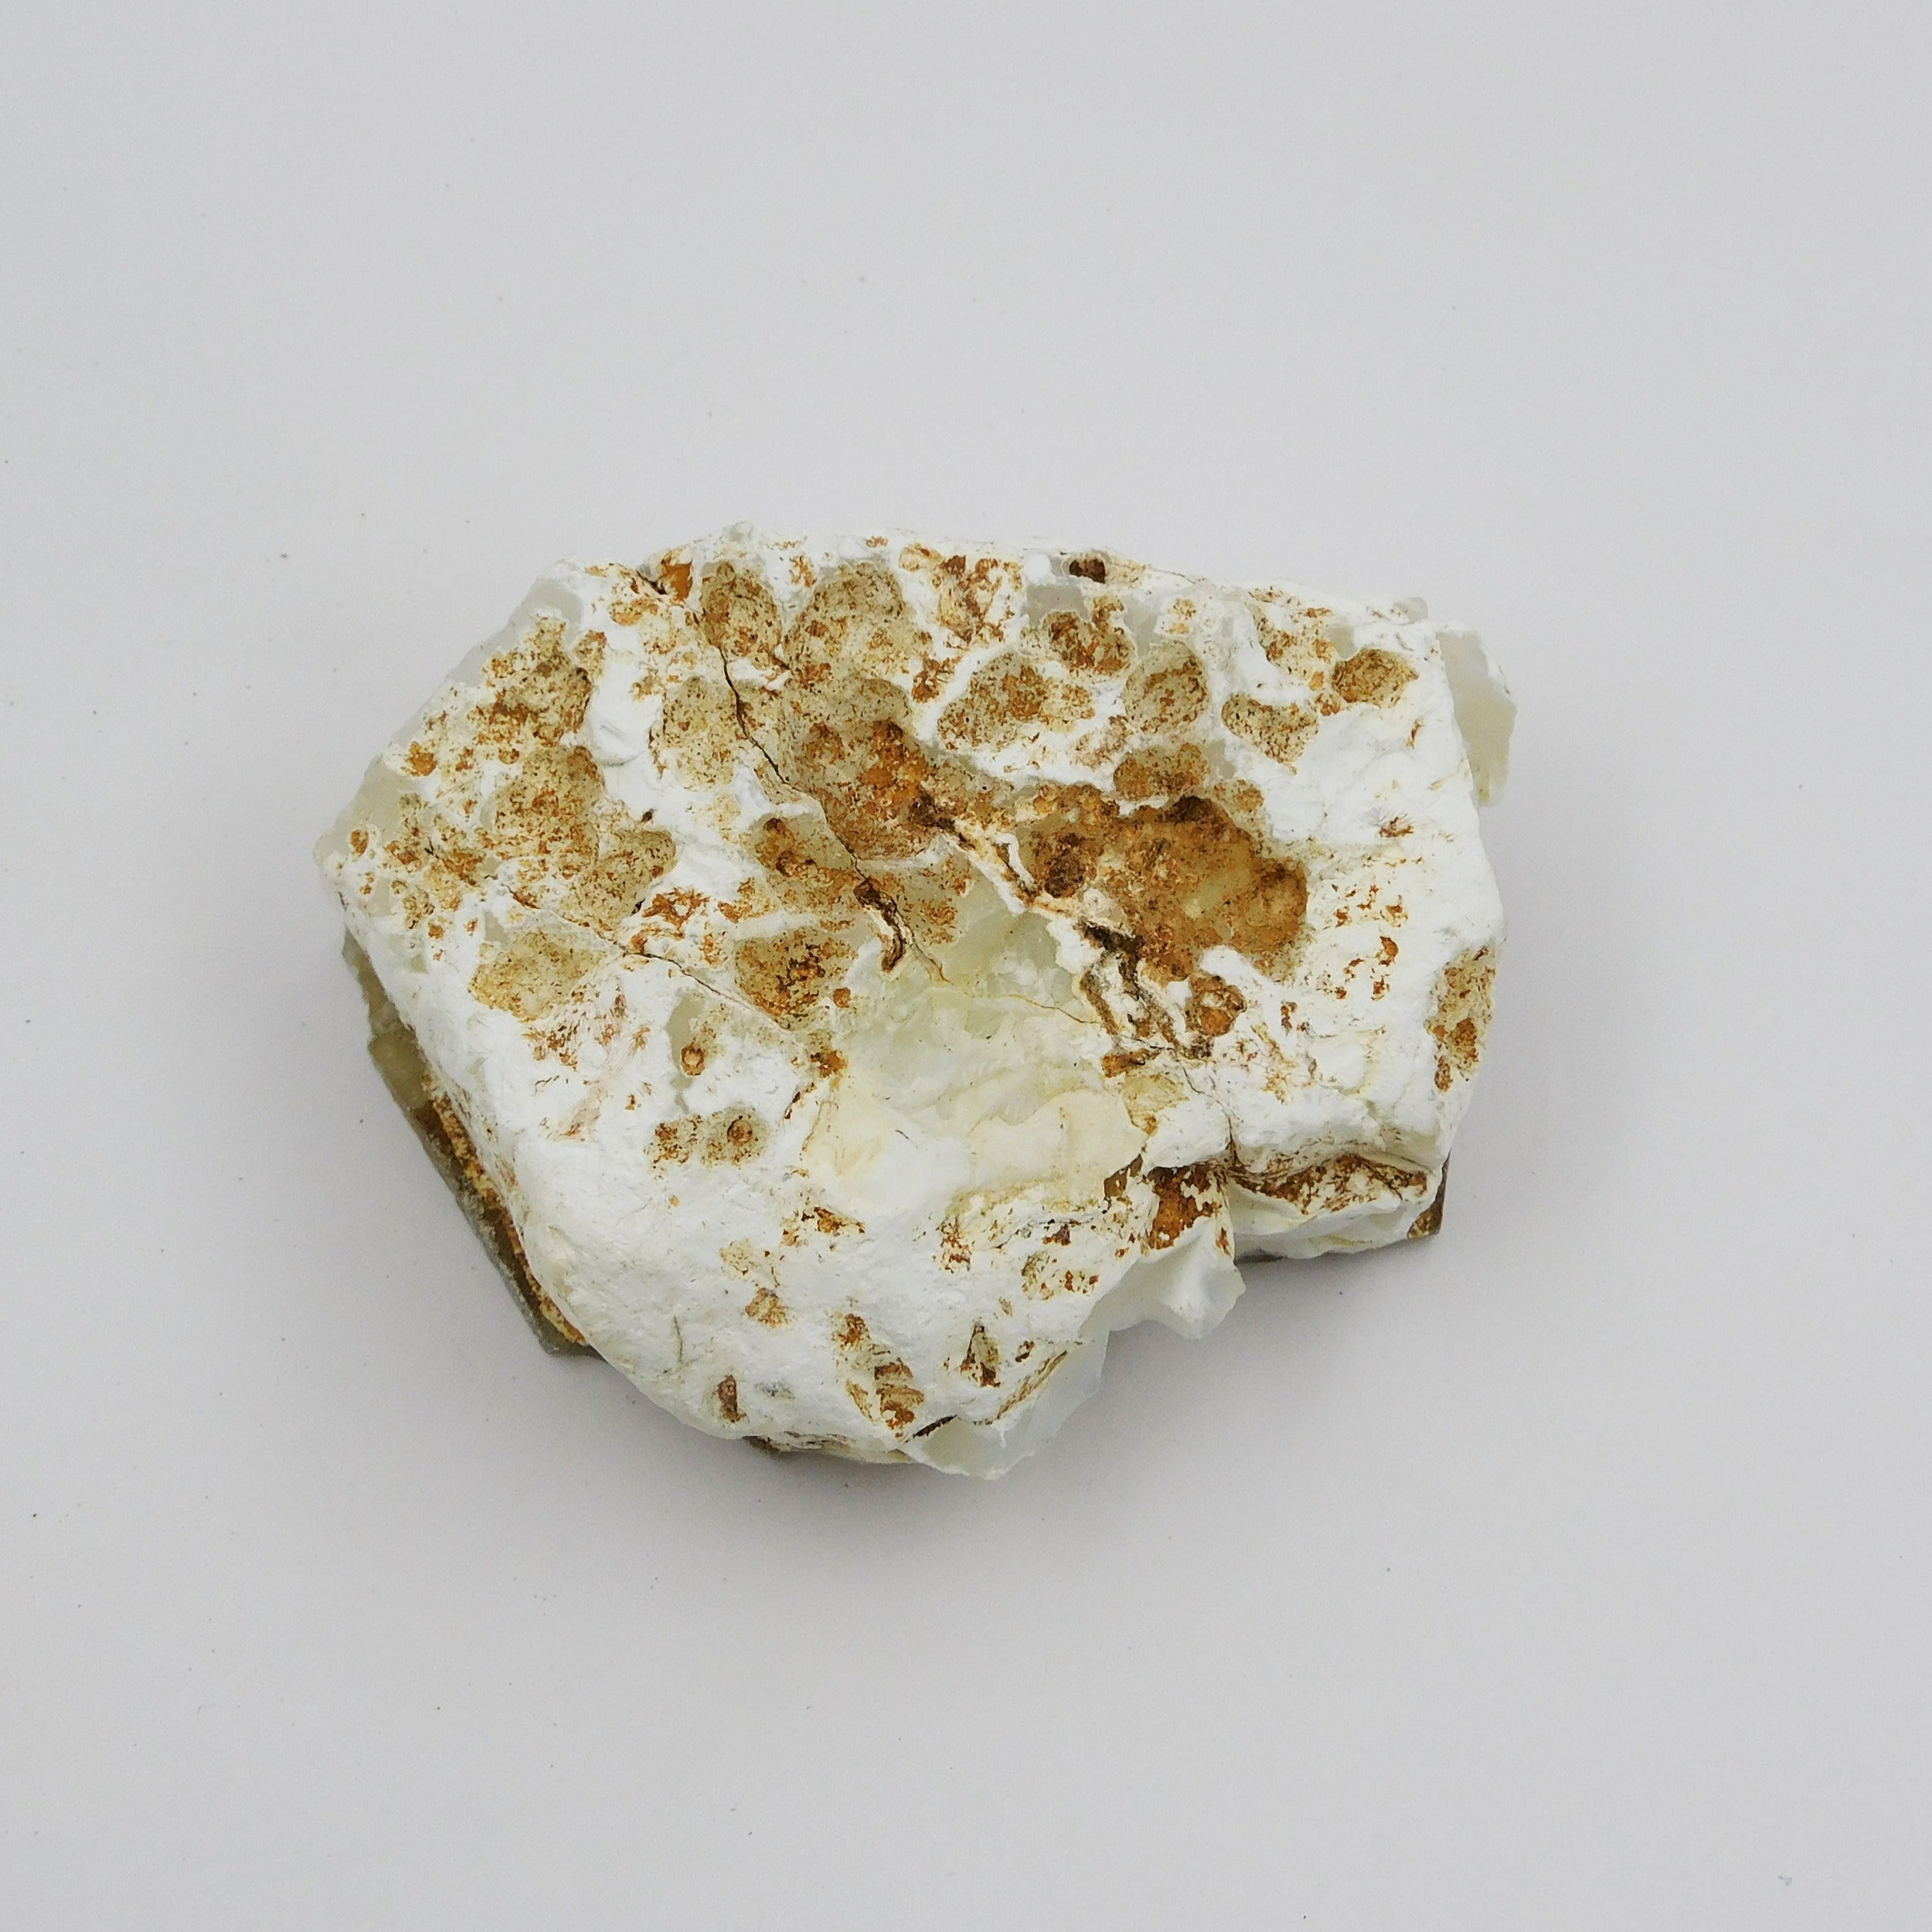 100% Natural White Opal Rough 451.95 Carat Huge Size Certified EARTH mined Loose Gemstone Rough | Free Delivery Free Gift | Opal Rough Gemstone